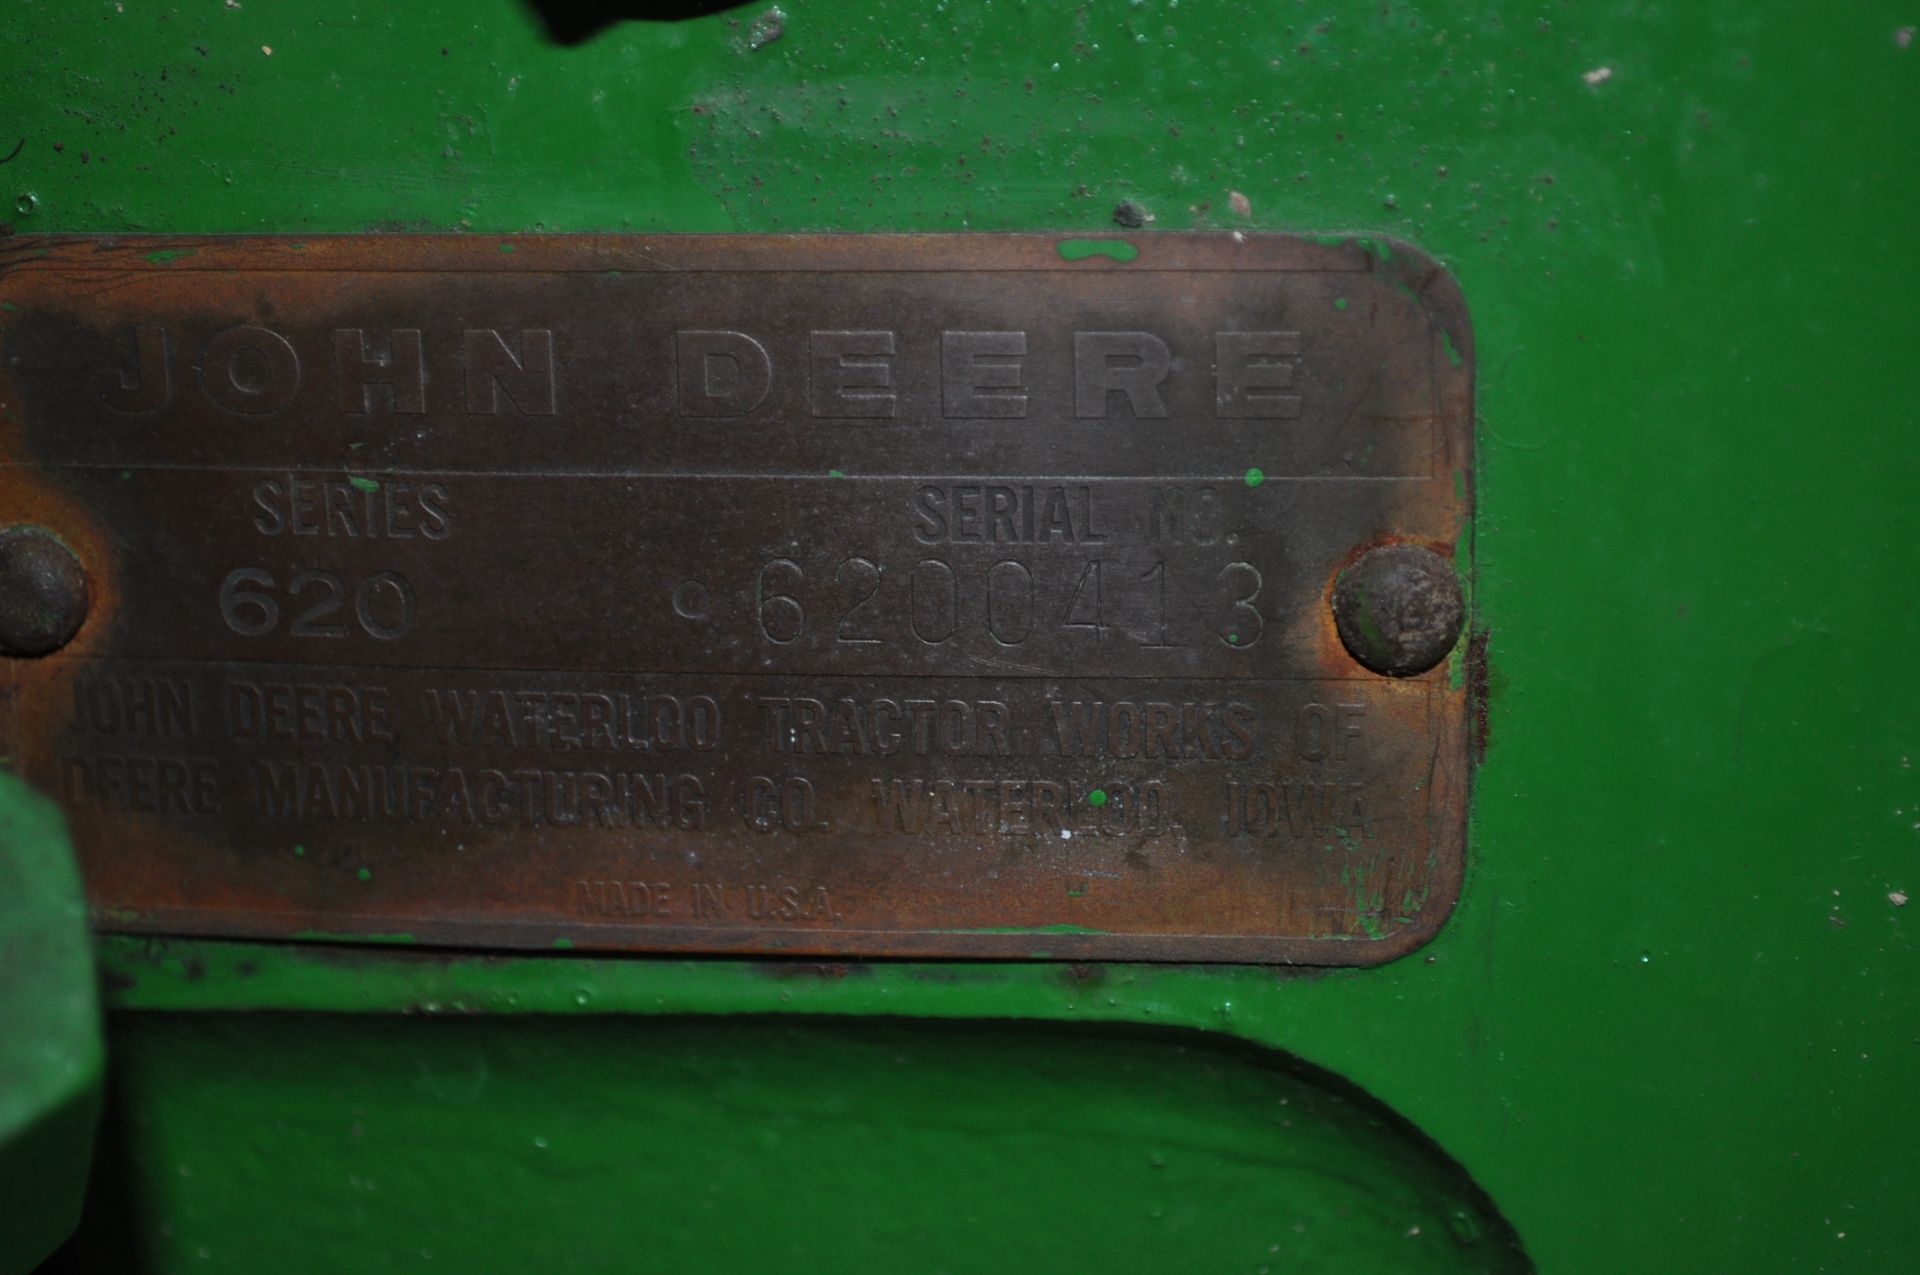 John Deere 620 Tractor, power steering, 3 pt with missing top link and lower arms, Pto, 1 hyd - Image 12 of 12